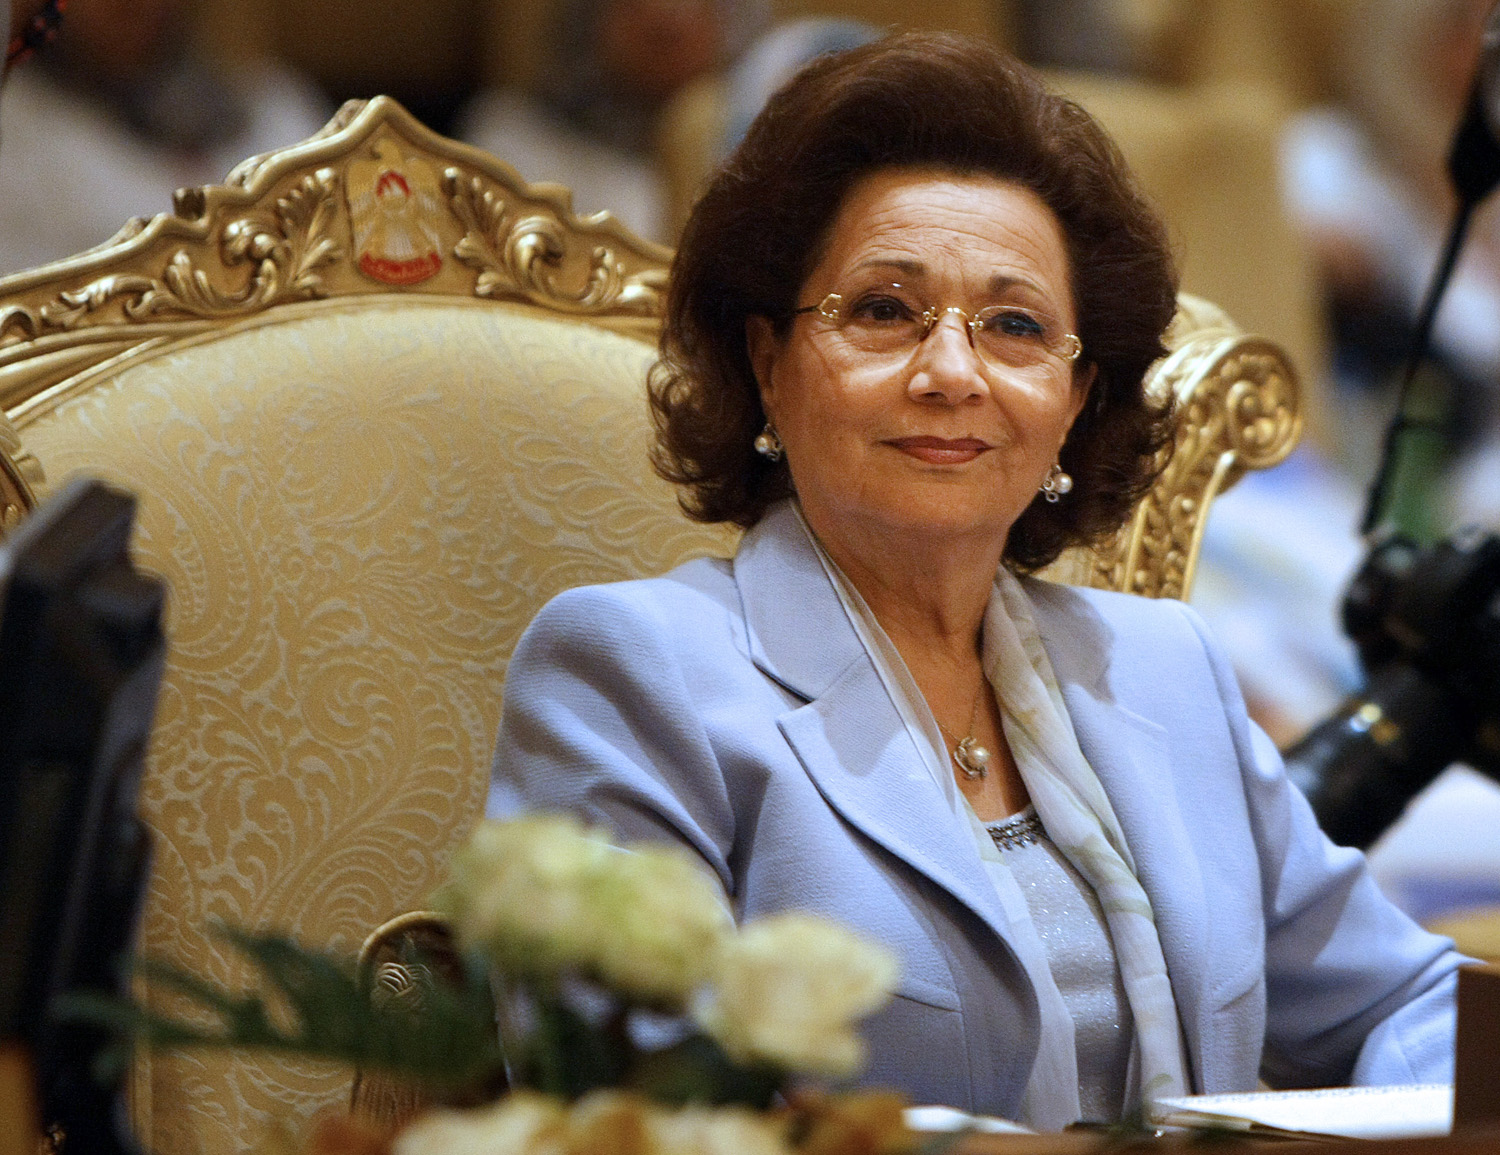 Egypt's First Lady Suzanne Mubarak attends the opening session of the second confernece of Arab Women Organisations, Abu Dhabi, November 11, 2008. 